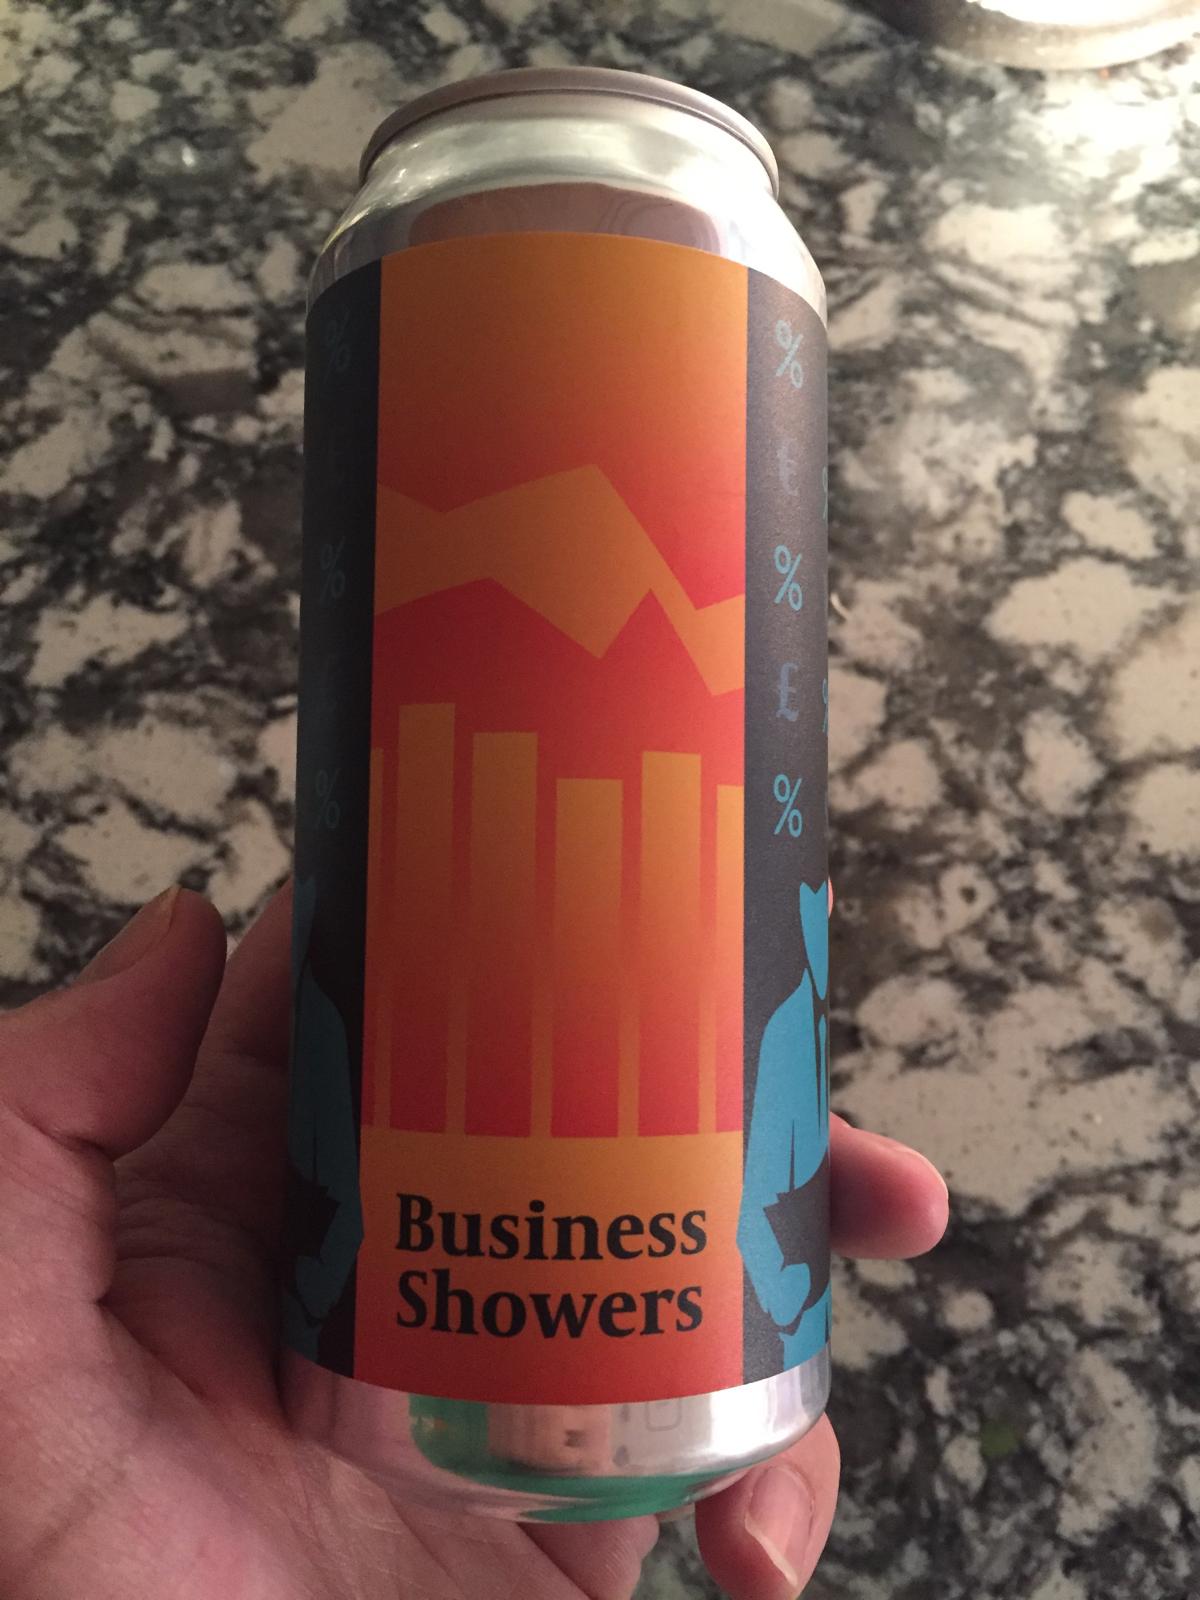 Business Showers